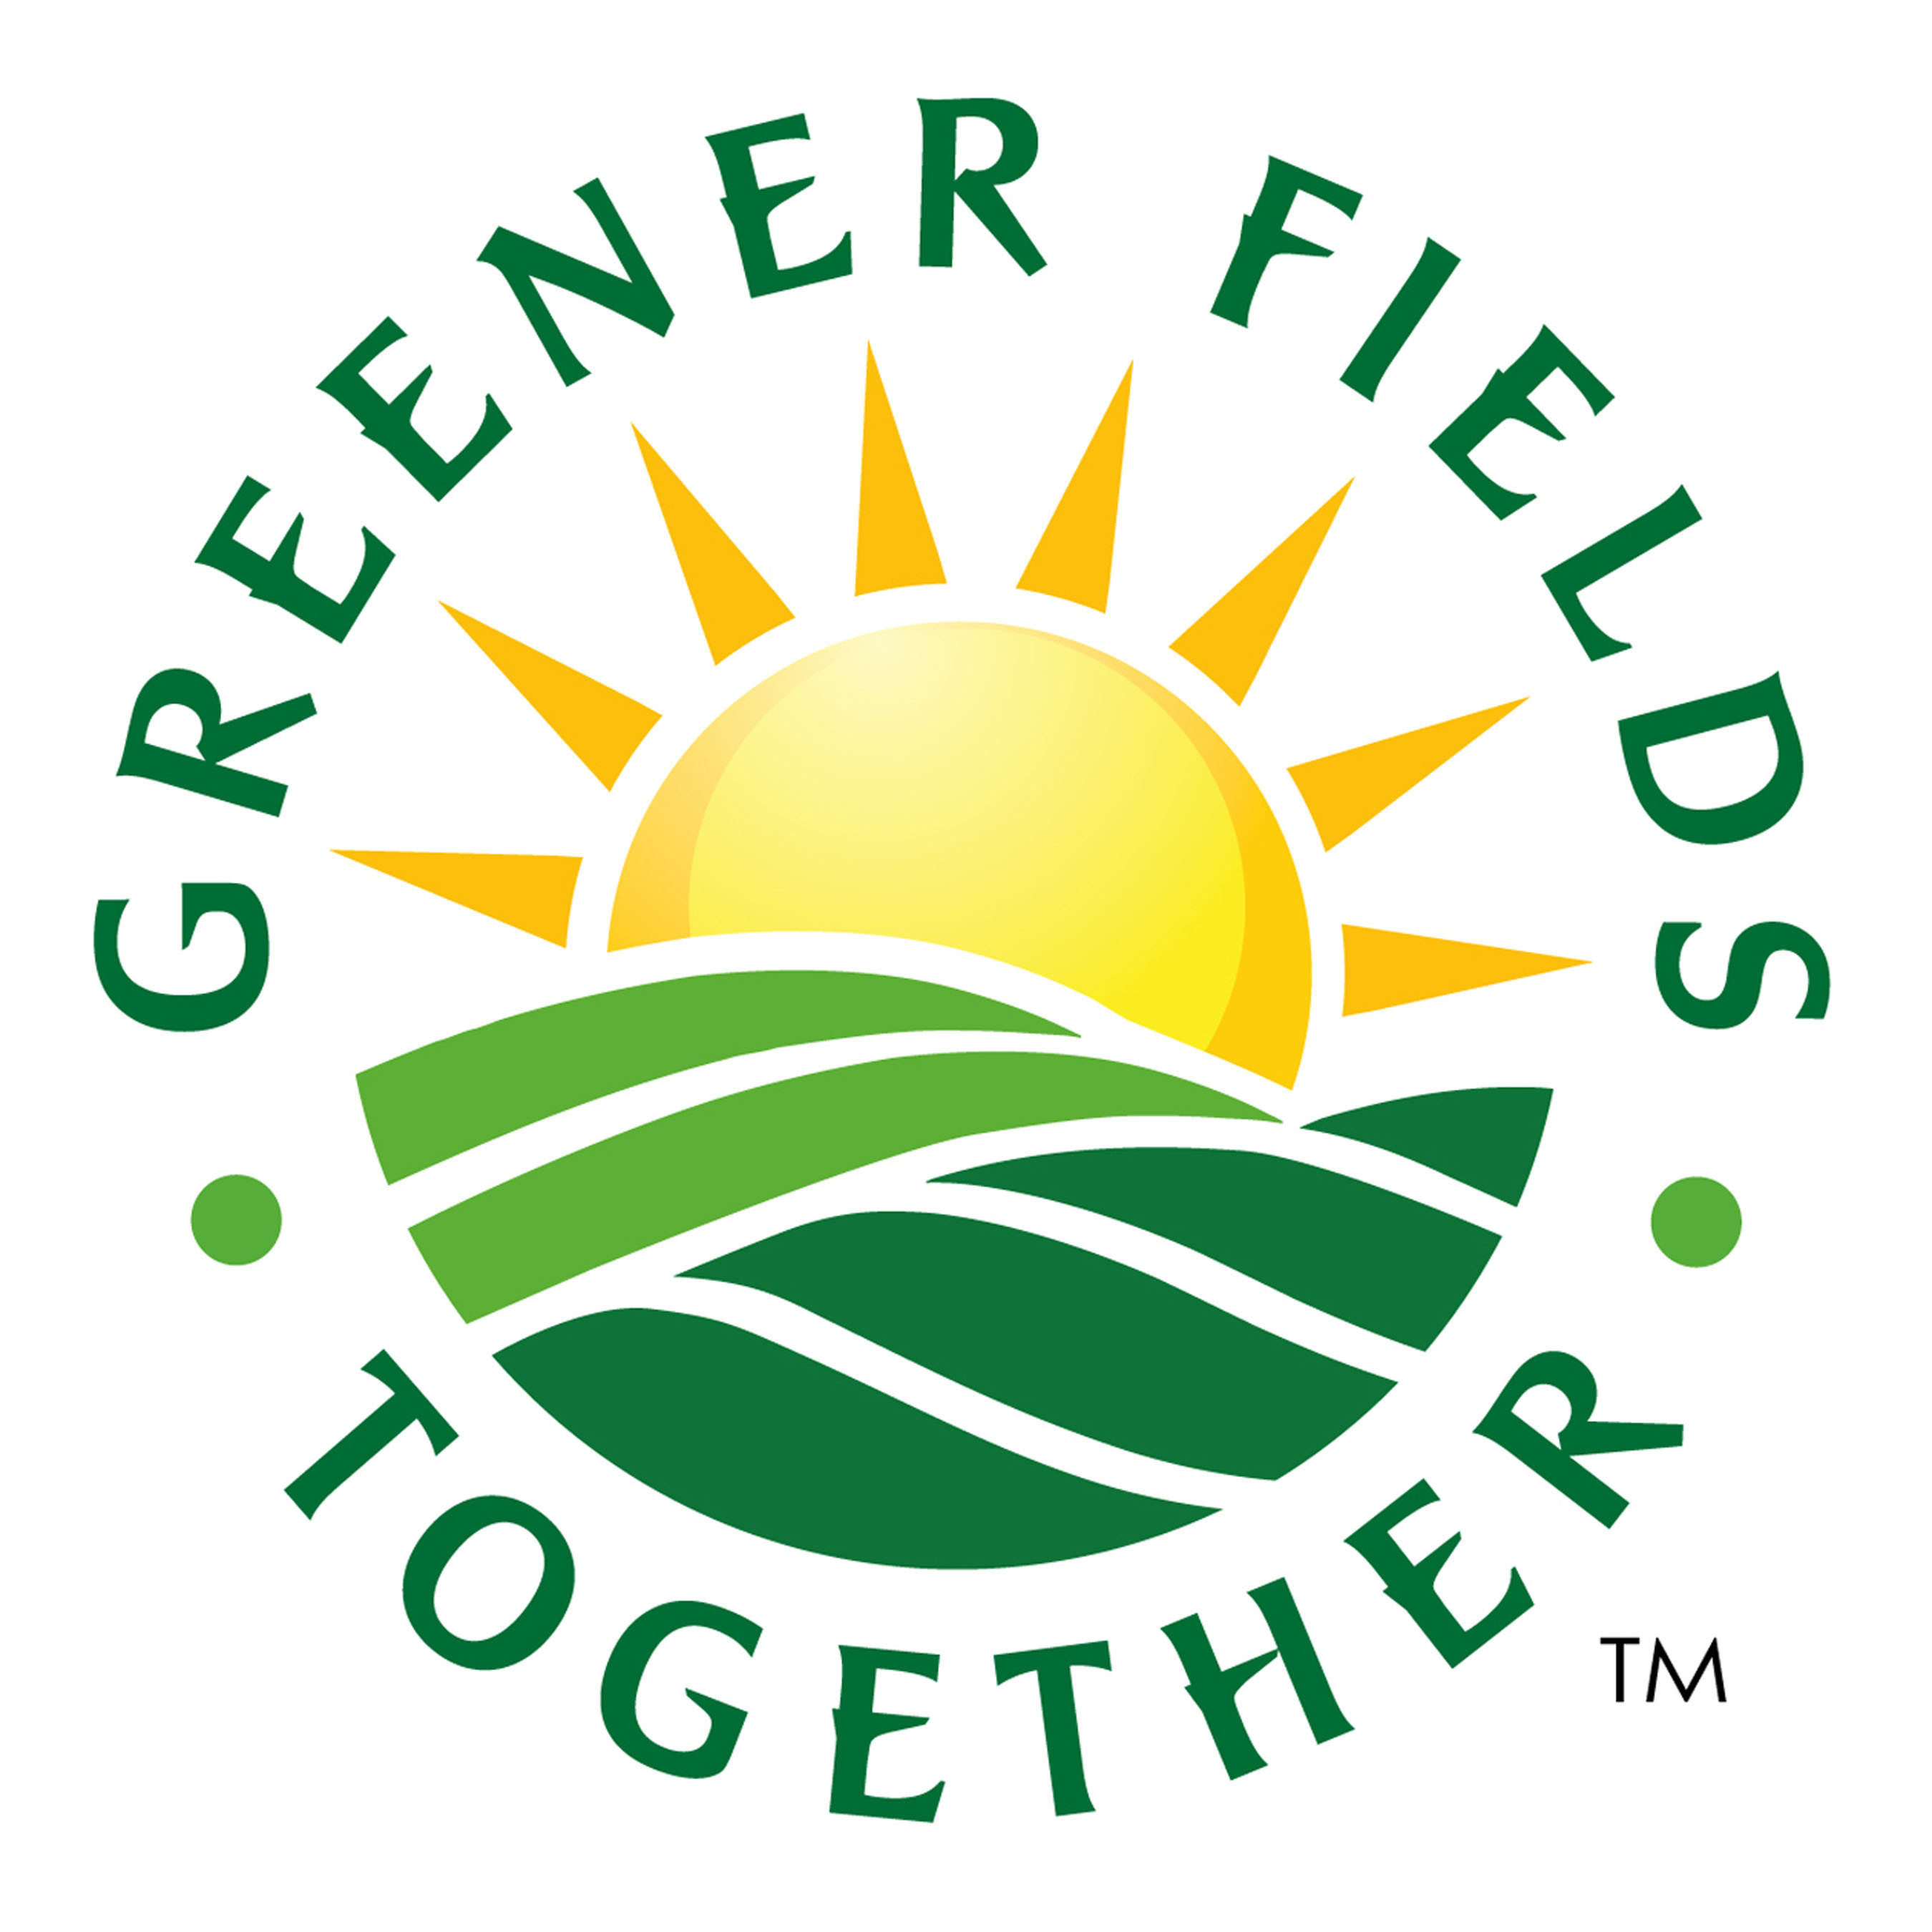 Greener Fields Together is a groundbreaking national field-to-fork sustainability and local produce initiative created by the PRO*ACT produce supply-chain company. (PRNewsFoto/Greener Fields Together) (PRNewsFoto/GREENER FIELDS TOGETHER)